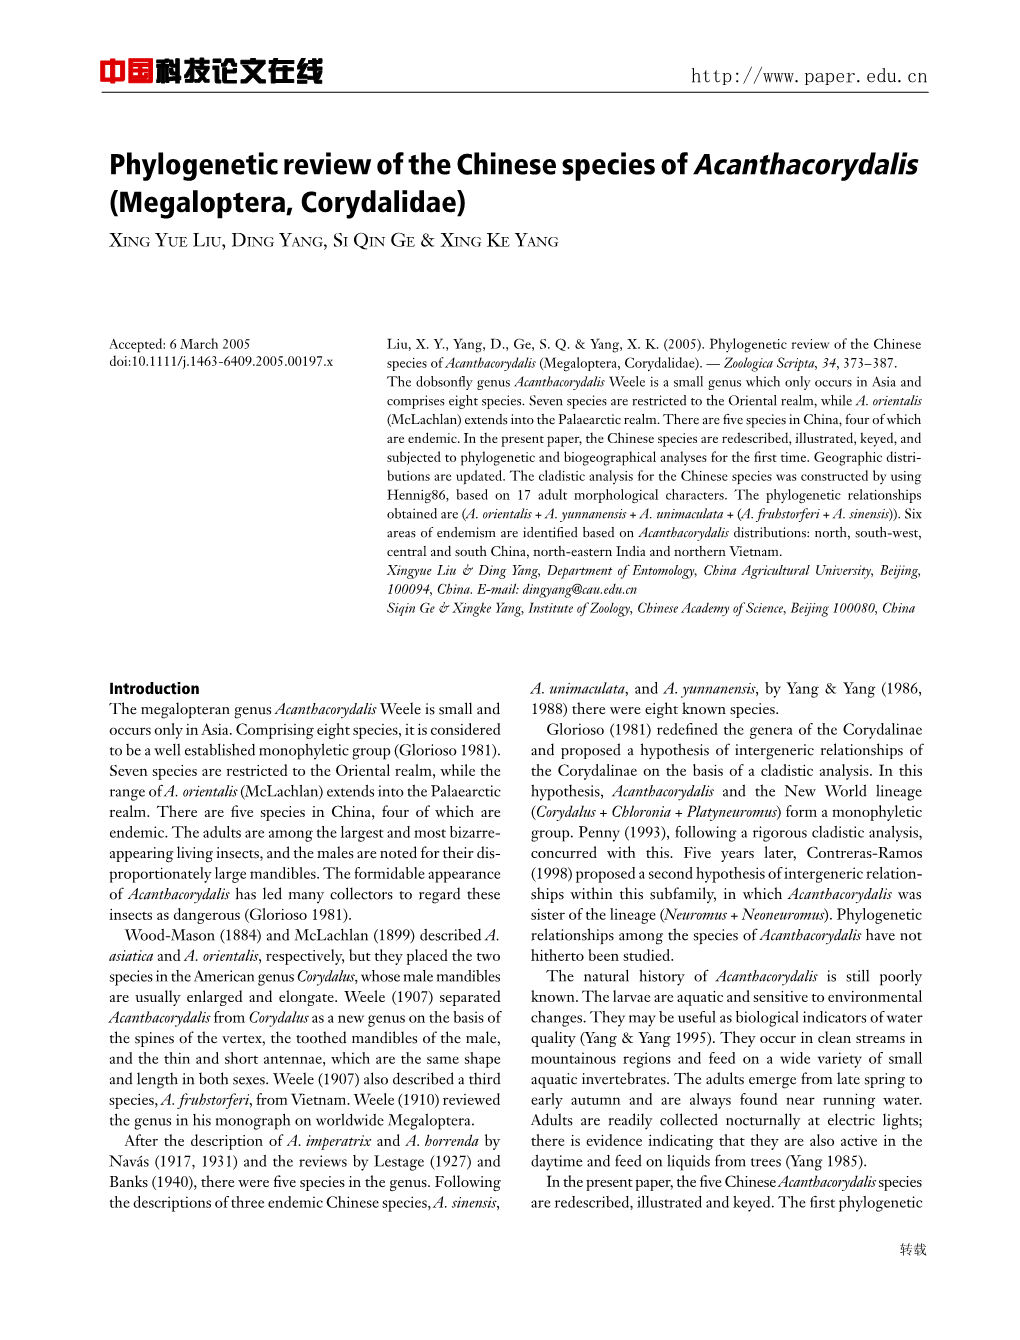 Phylogenetic Review of the Chinese Species of Acanthacorydalis • X